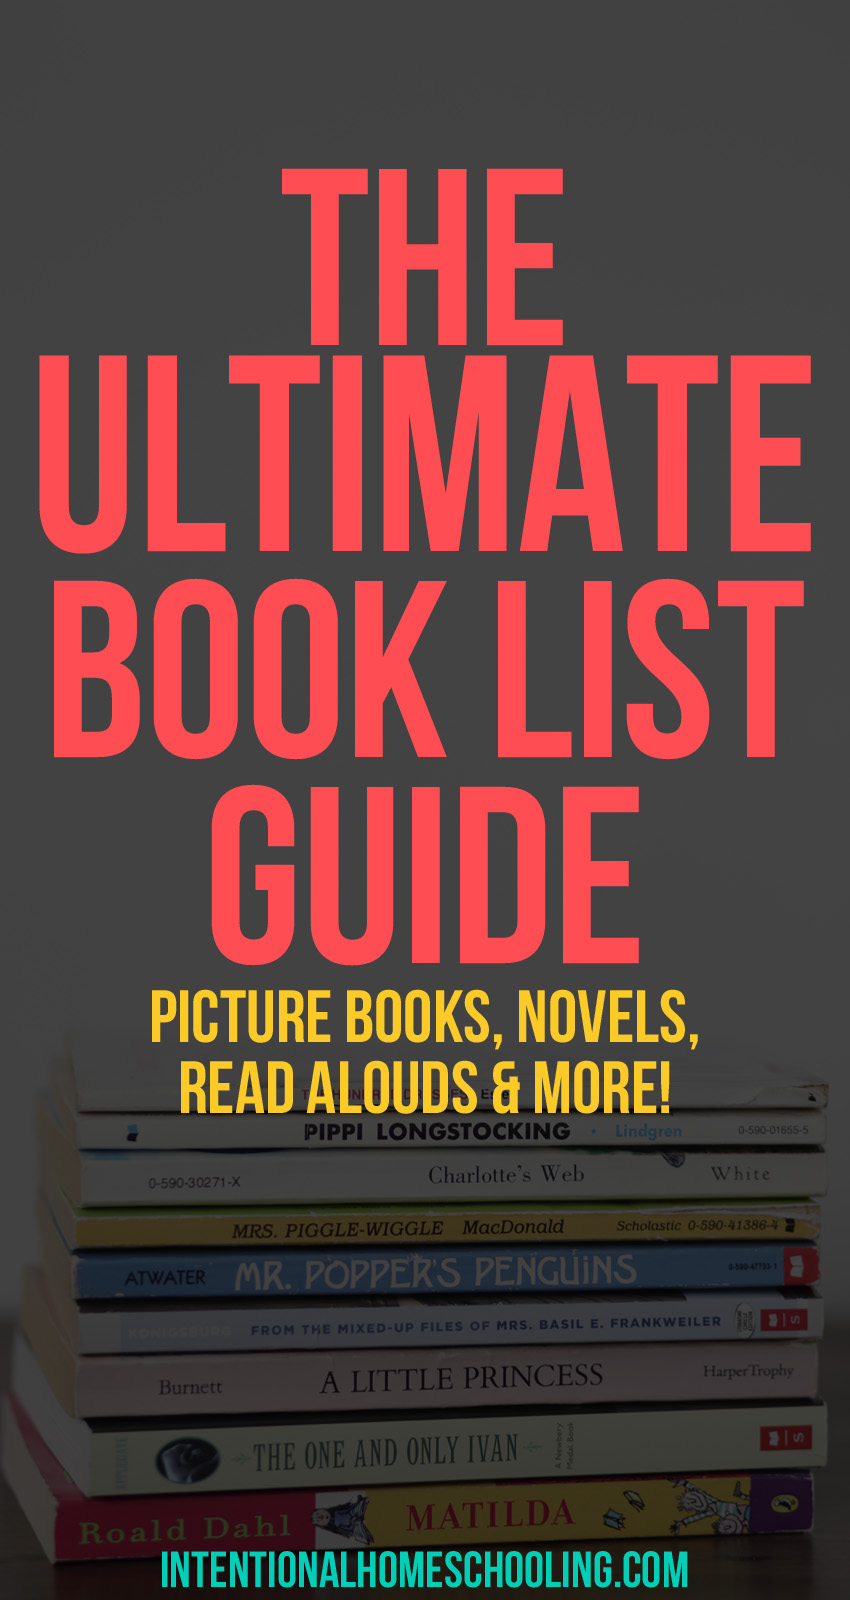 The Ultimate Book List Guide - Lists of Best Picture Books, Best Read Aloud Novels, Best Chapter Books, Best Classic Novels and More